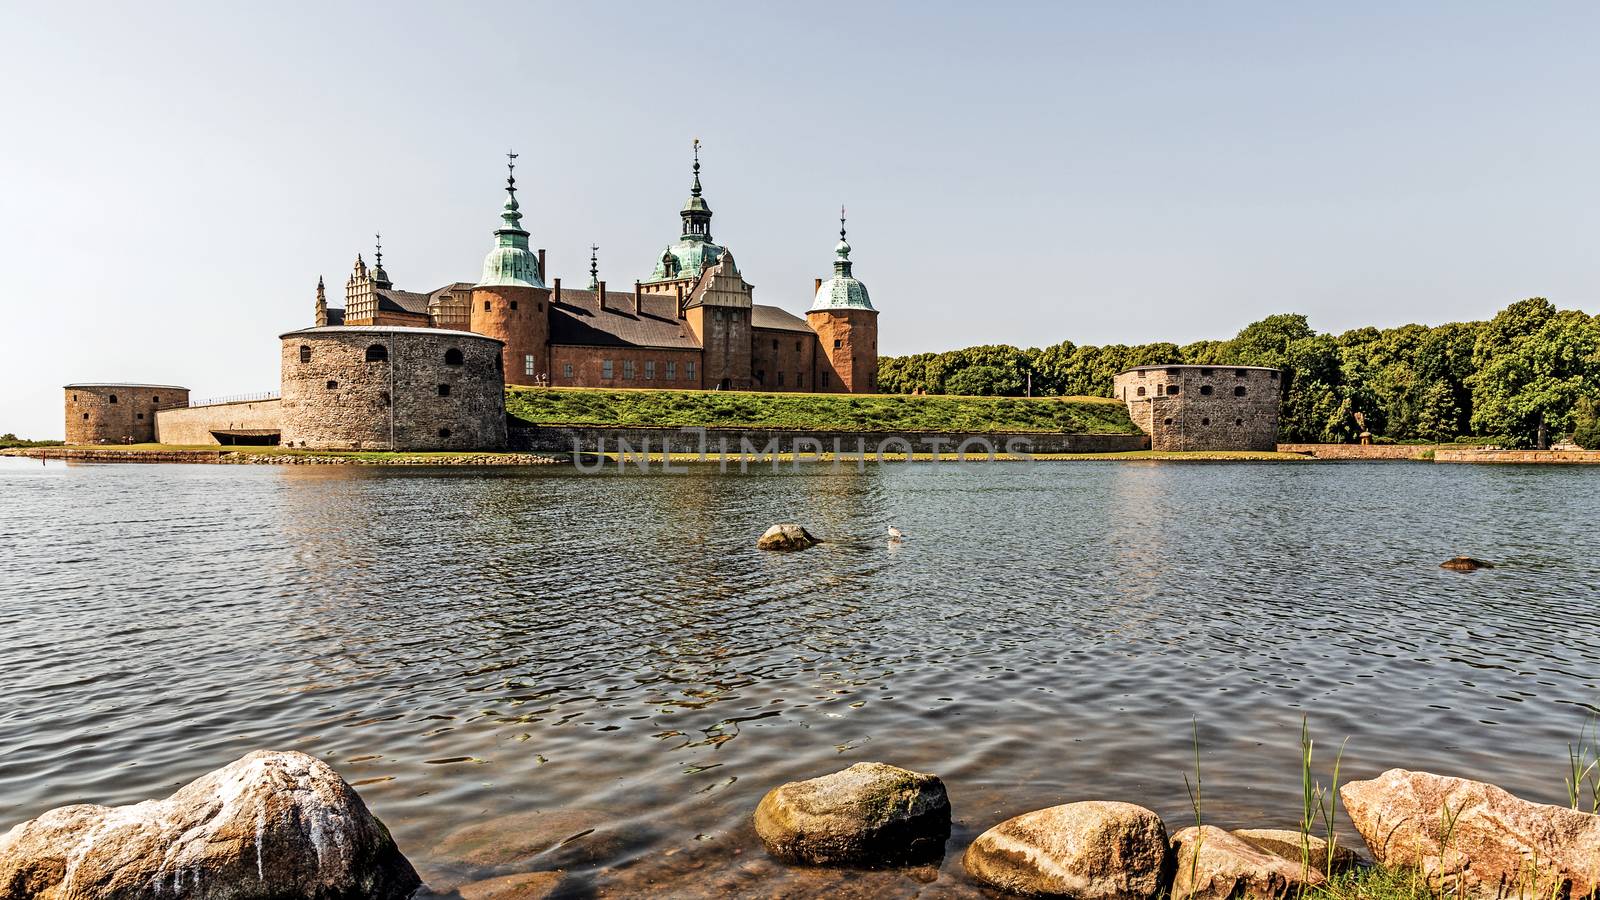 The legendary Kalmar castle dating back 800 years reached its current design during the 16th century when rebuilt by Vasa kings from the medieval castle into a Renaissance palace.